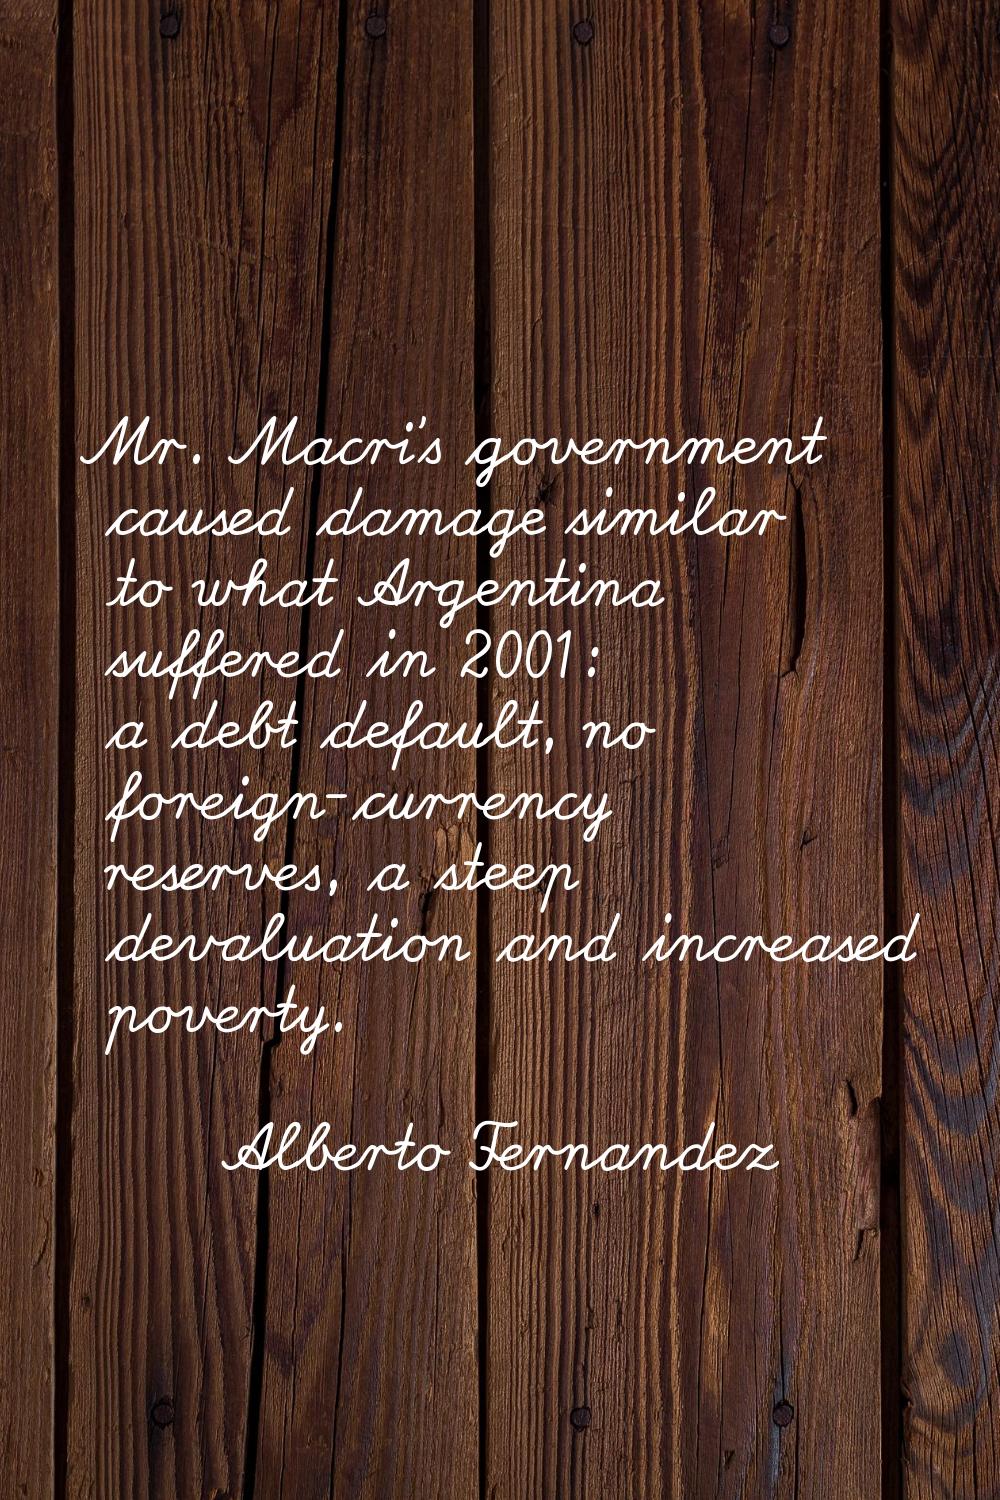 Mr. Macri's government caused damage similar to what Argentina suffered in 2001: a debt default, no